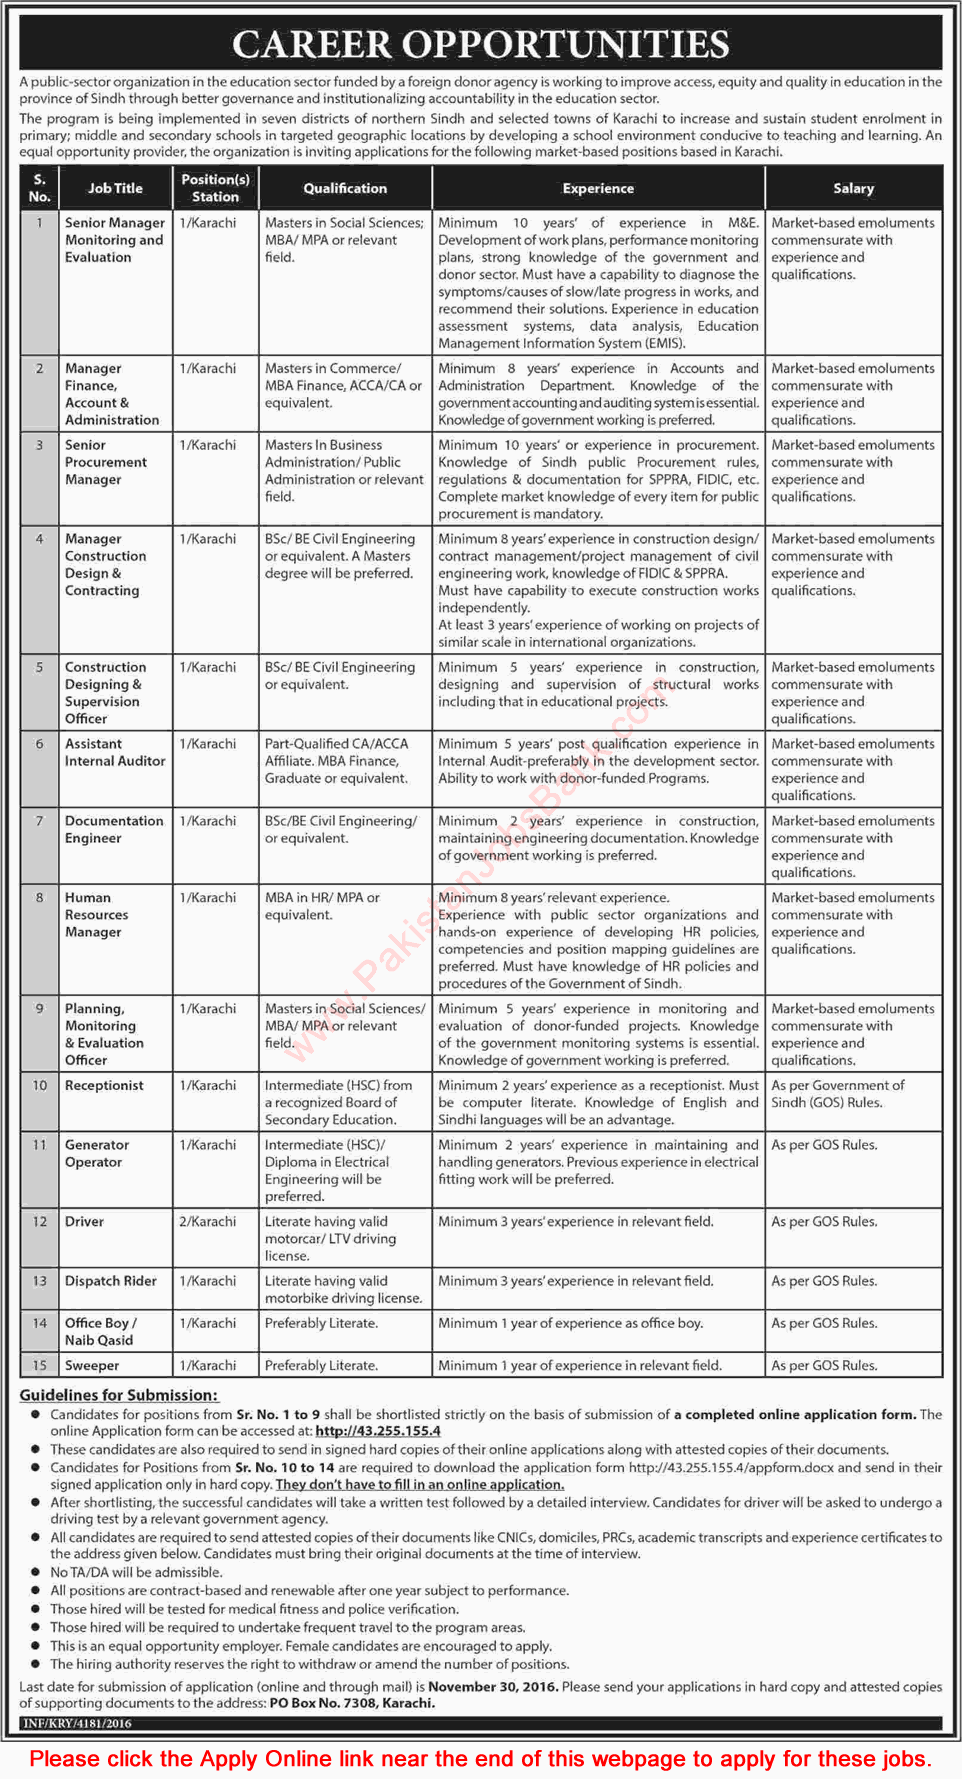 PO Box 7308 Karachi Jobs 2016 November Online Application Form Managers, Engineers & Others Latest